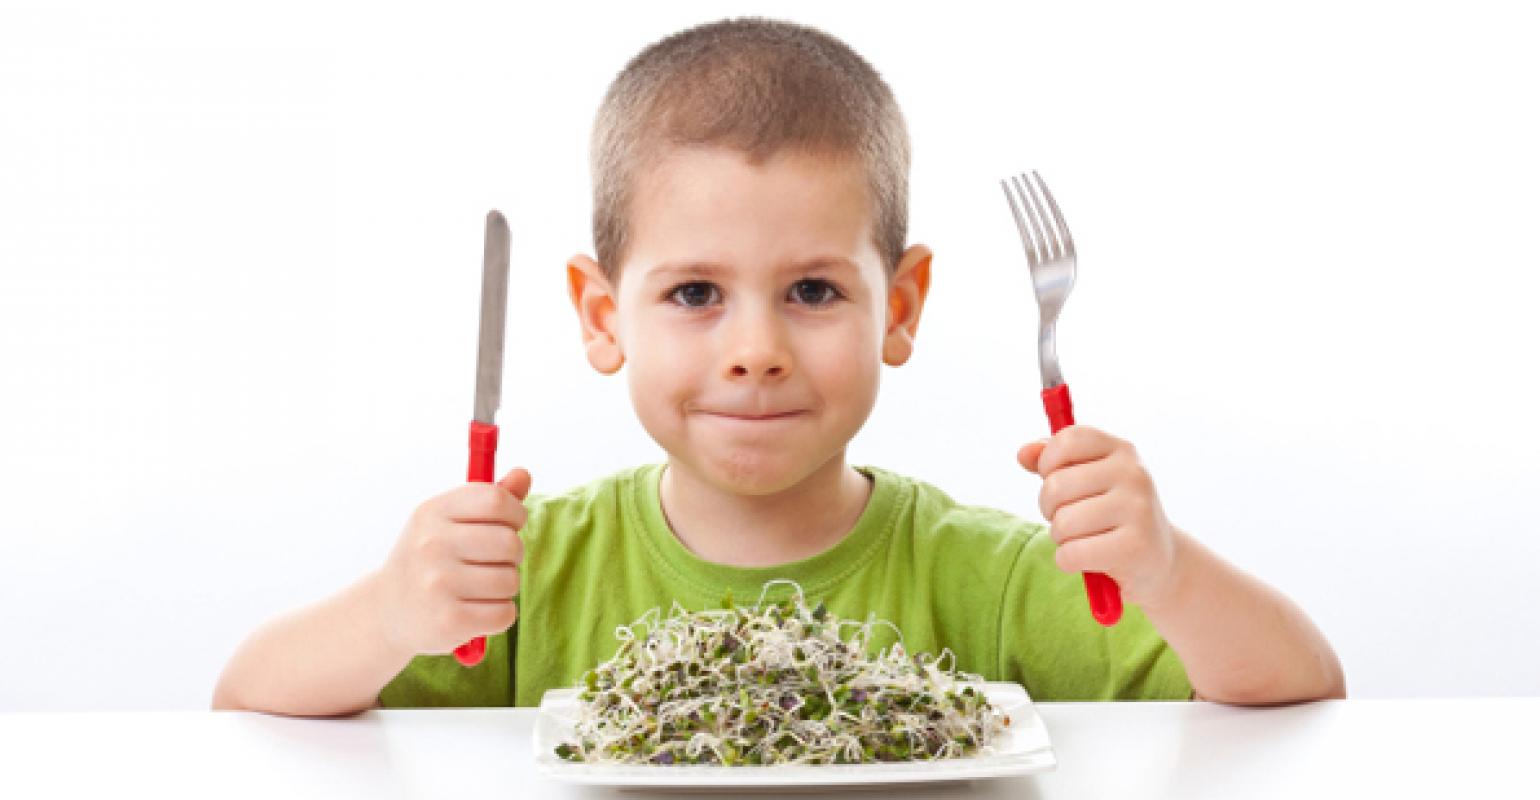 Restaurant policies that ban children from dining may be shortsighted |  Restaurant Hospitality